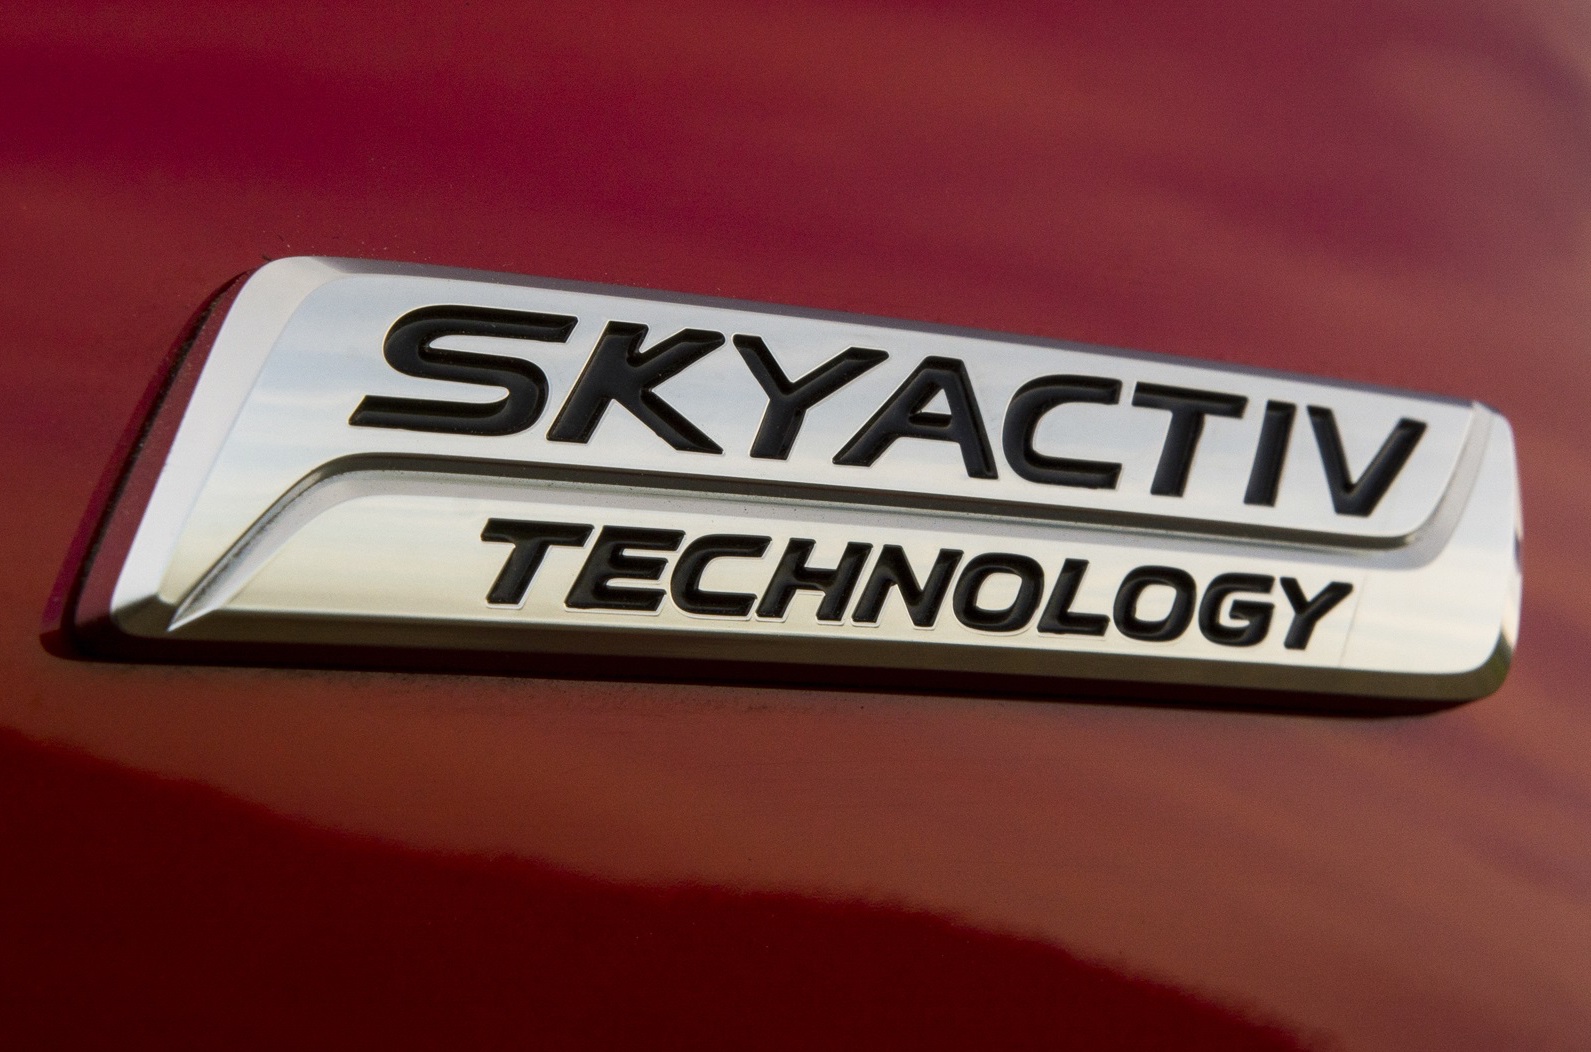 Mazda SKYACTIV-X compression ignition petrol coming in 2019